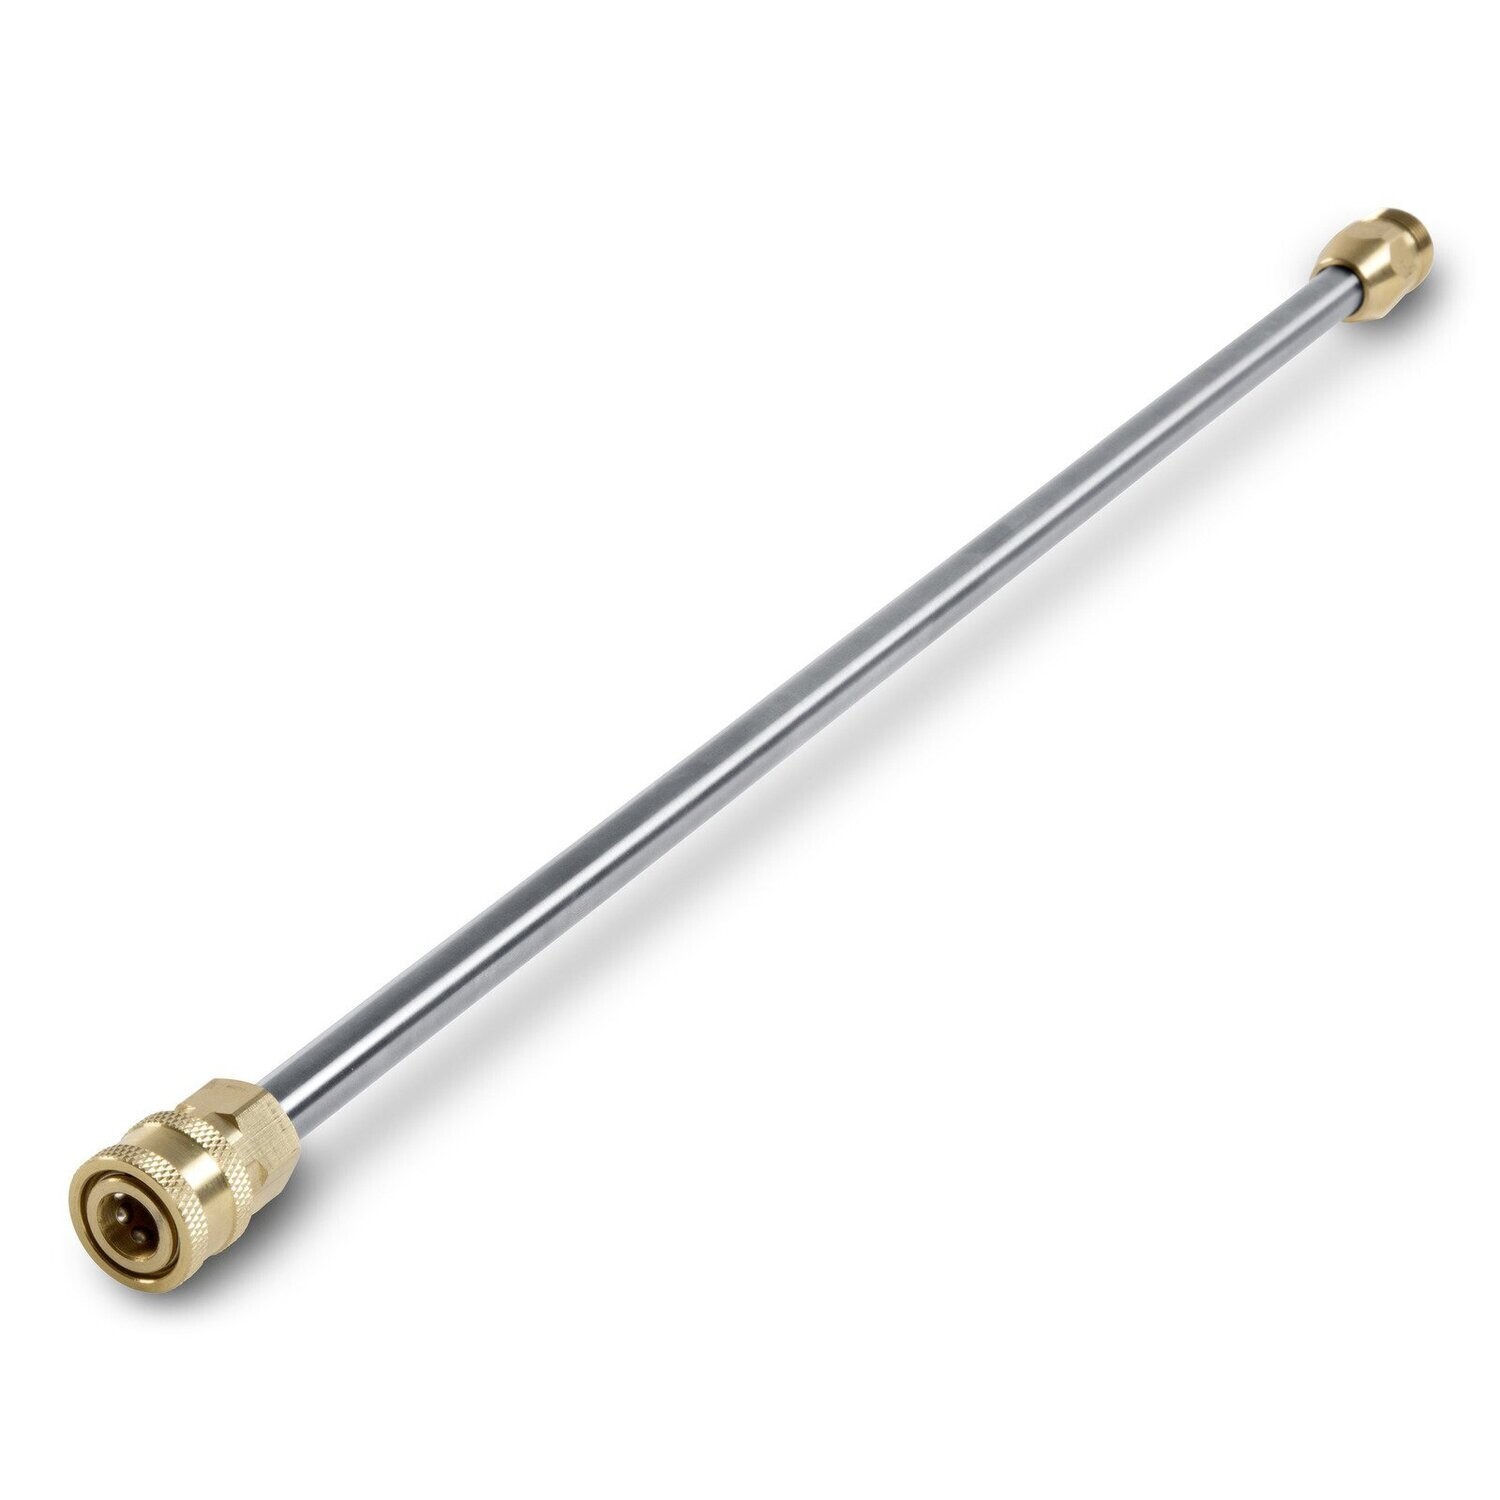 1/4 INLET LANCE WITH 1/4 FEMALE QUICK COUPLER AND 22MM ADAPTER